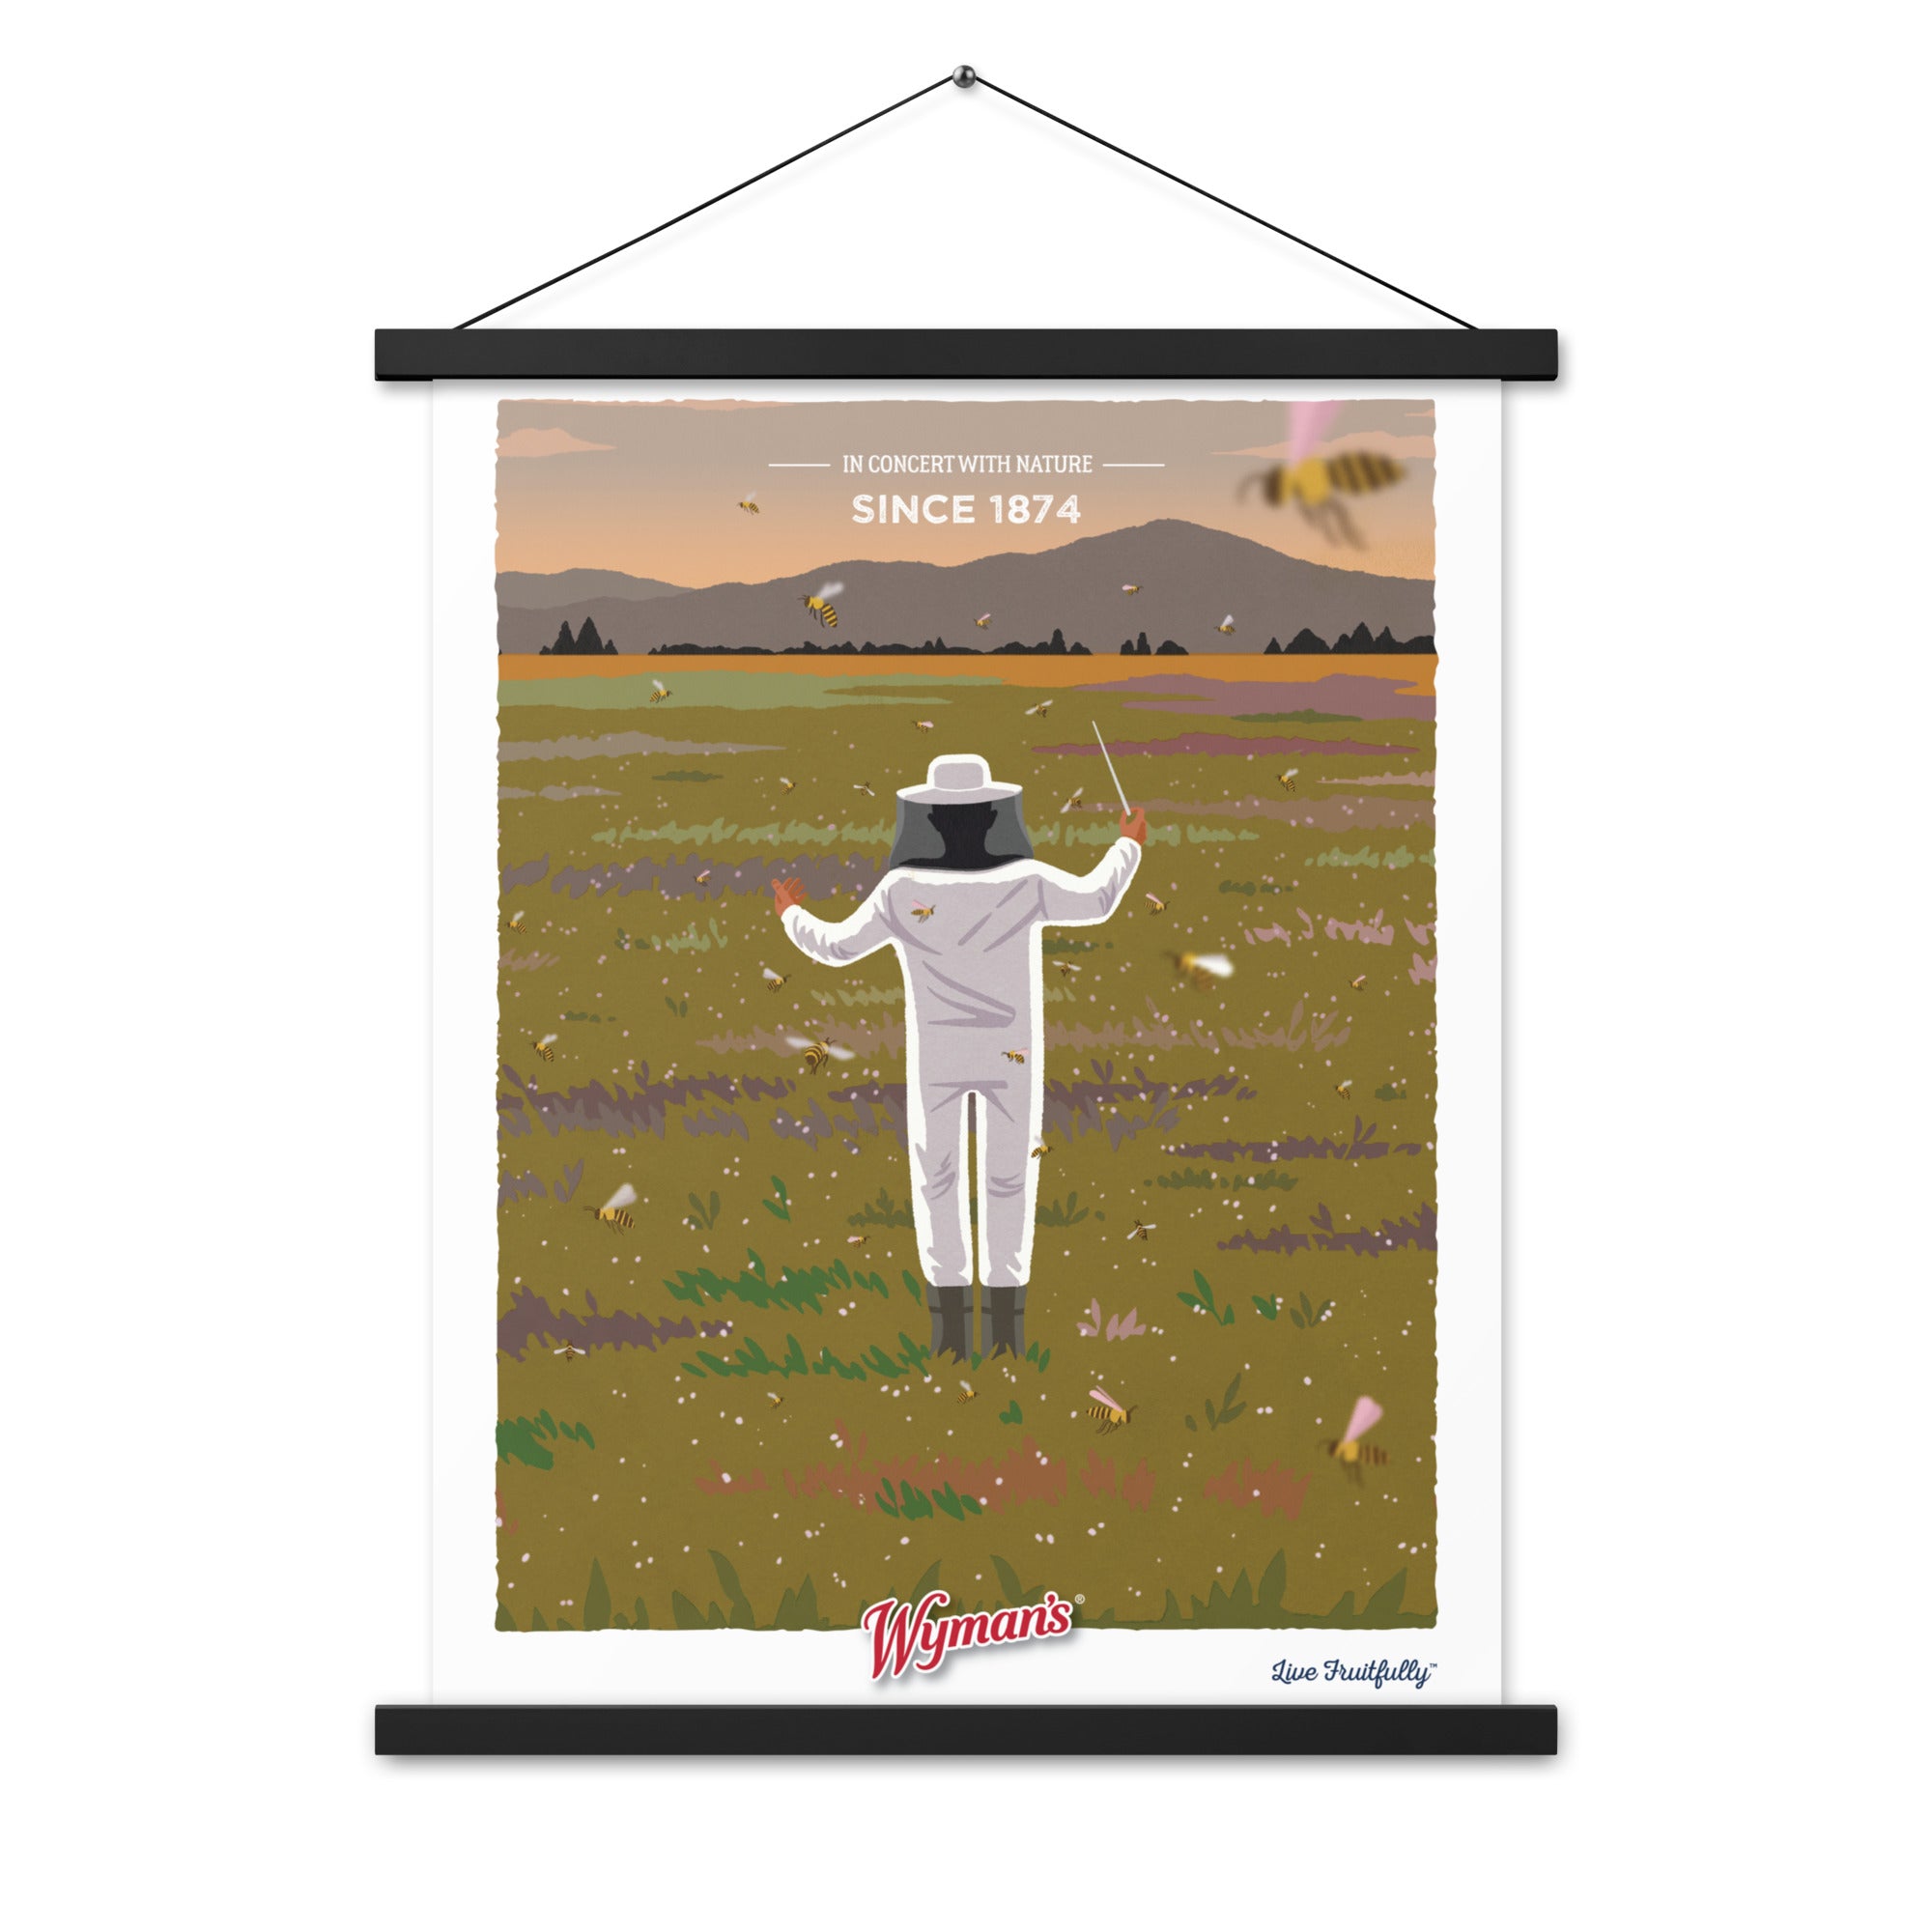 A Shop Wyman's In Concert with Nature Since 1874 Poster of a man flying a bee in a field with custom printing finishes.